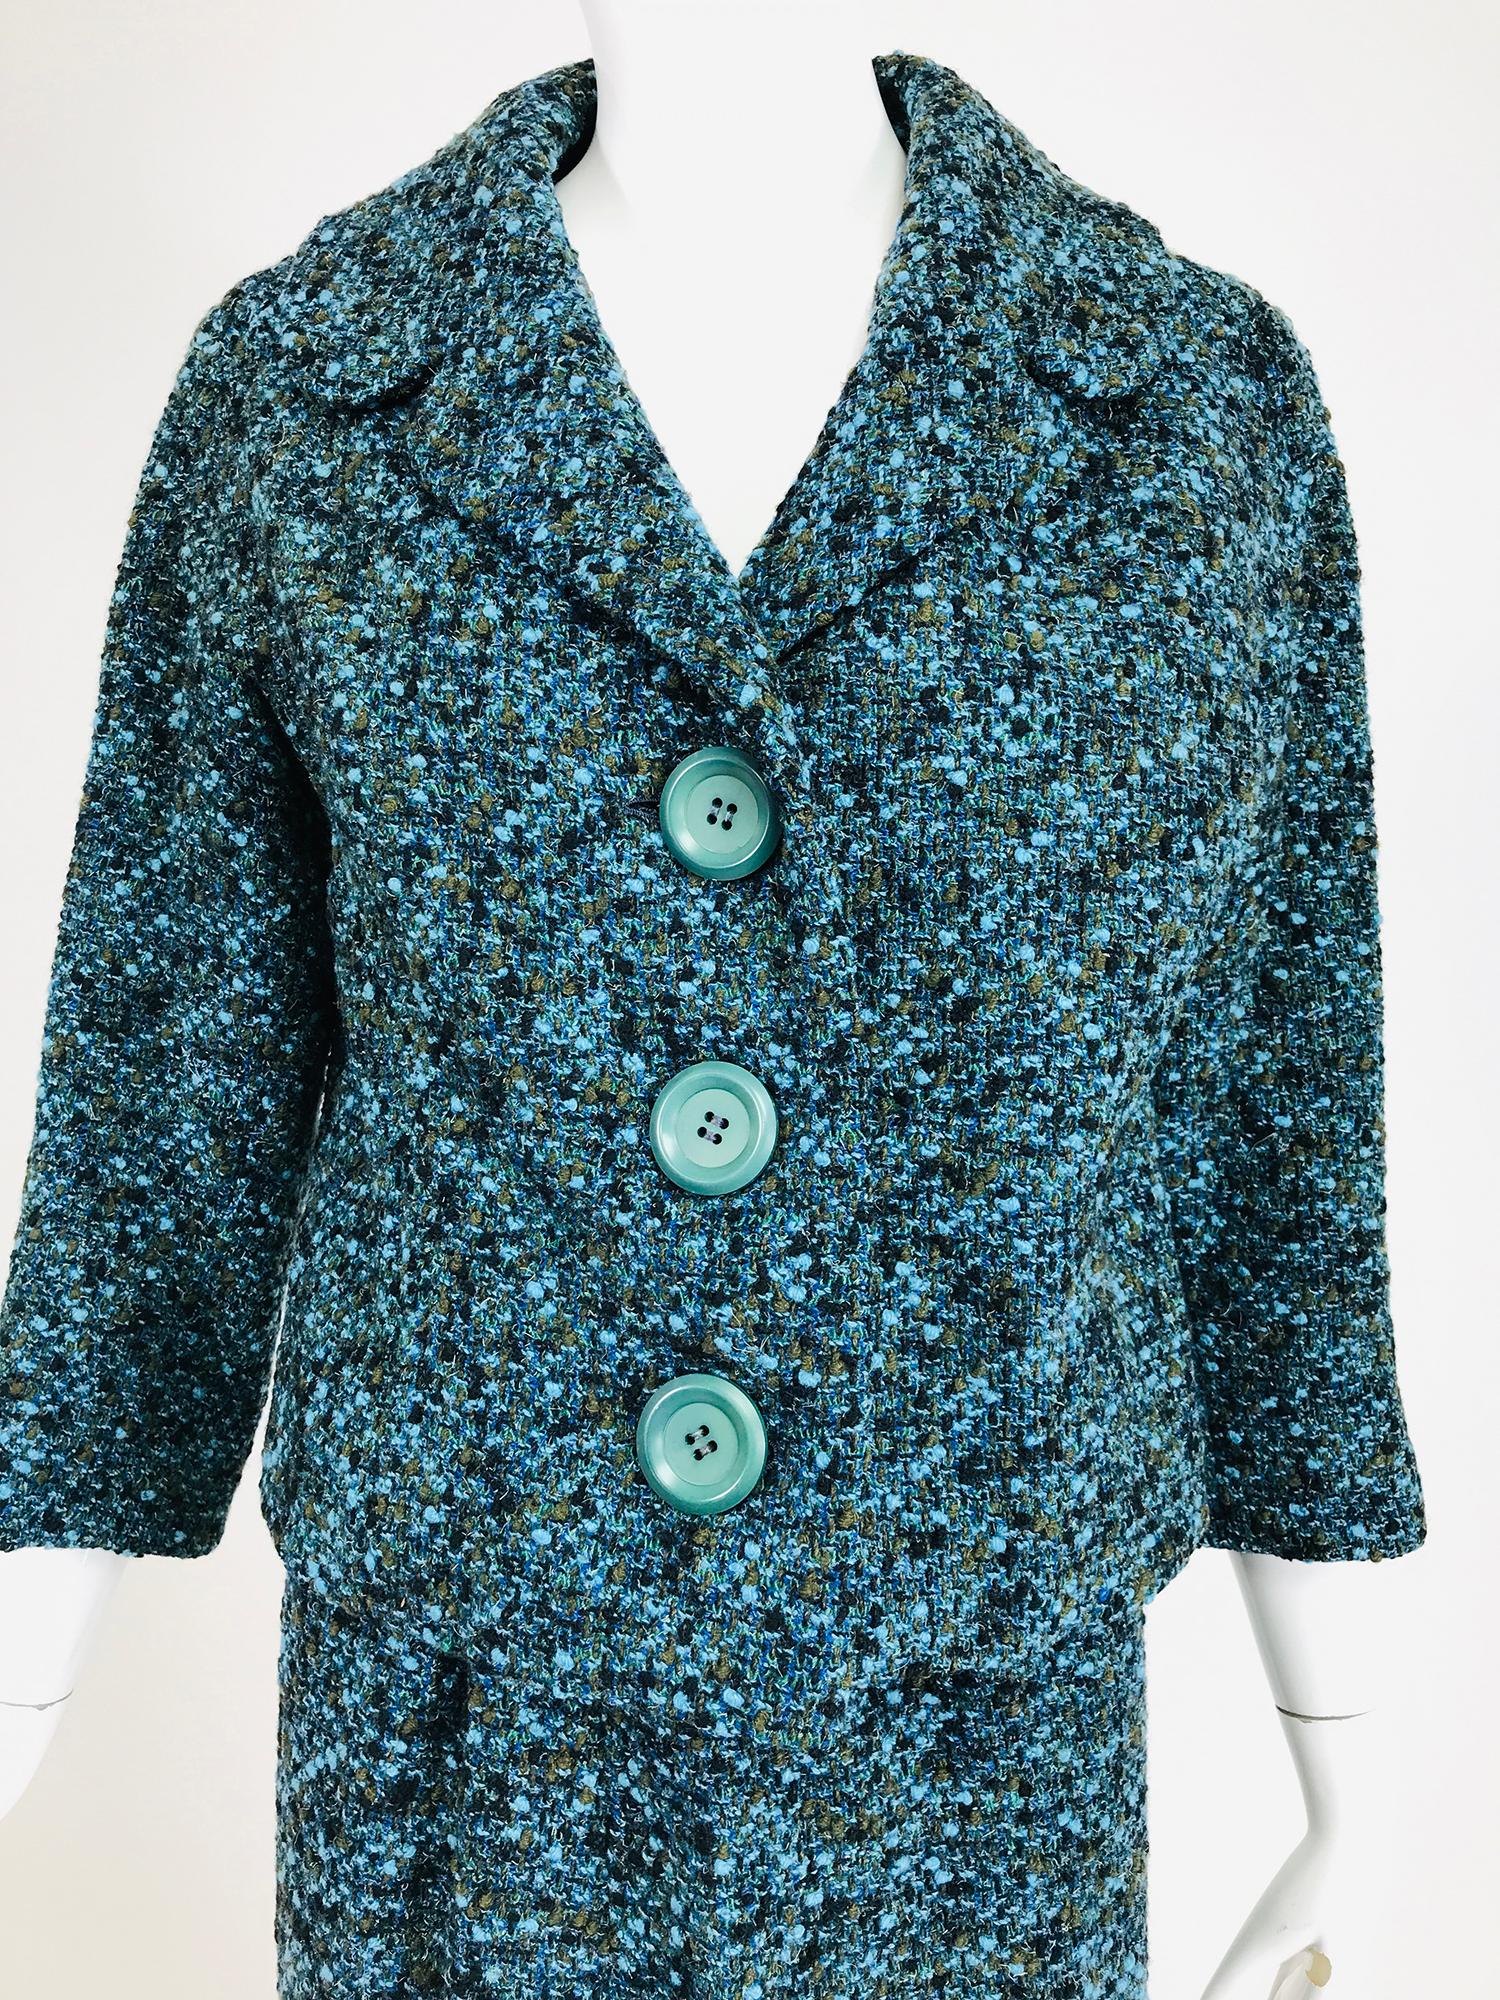 Jeanne Lanvin numbered couture, early 1960s designed by Jules-Francois Crahay. Aqua blue nubby wool tweed skirt suit, speckled wool in aqua blue, loden green & black. The jacket has a v neckline with curved notched lapels, cropped and boxy, it